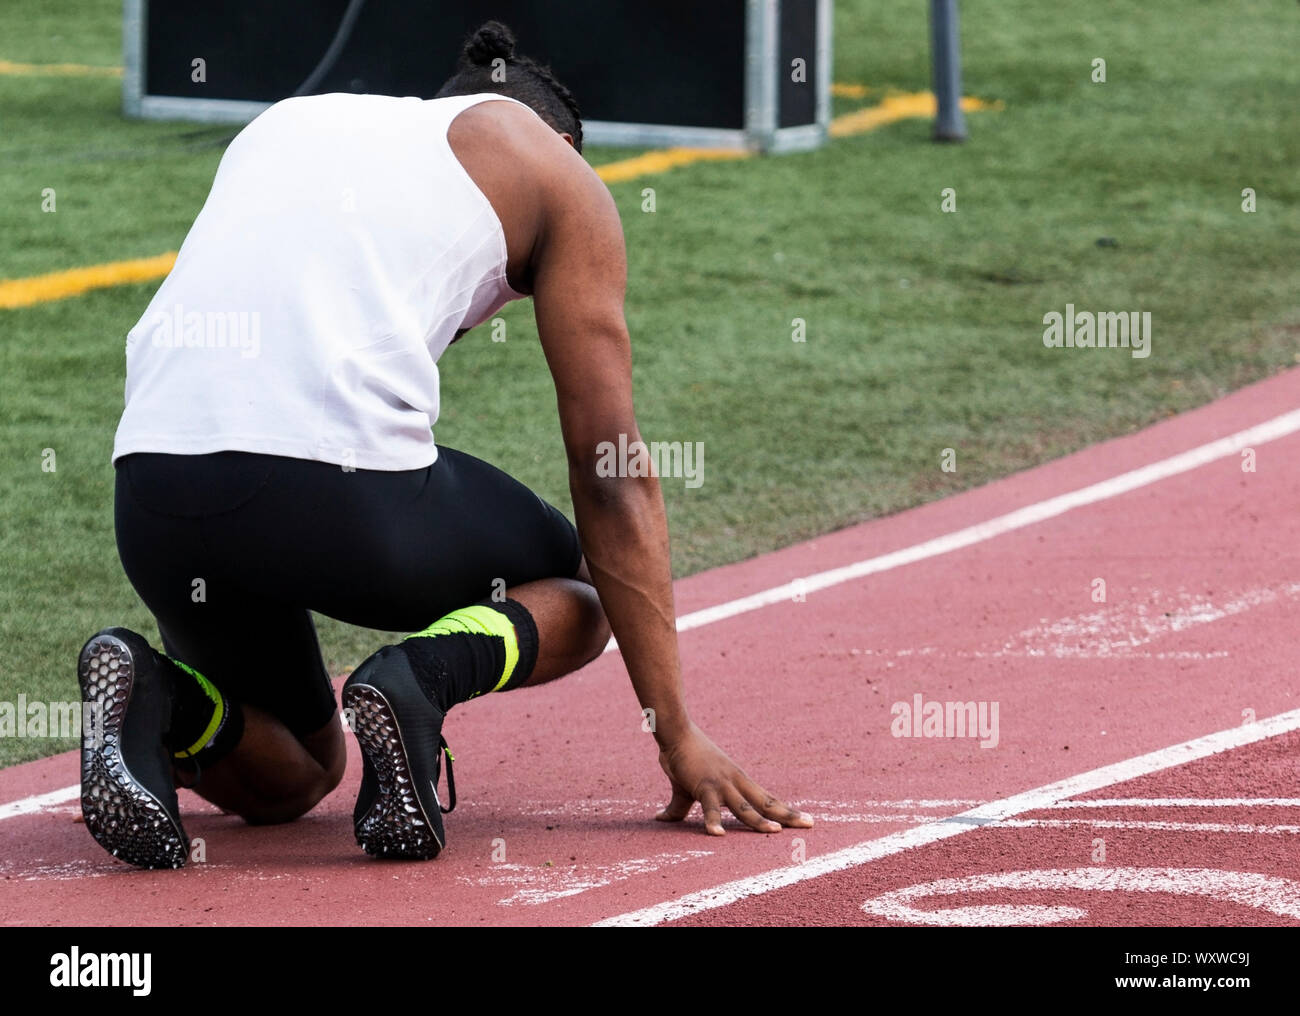 A high school sprinter is ready to start his race while he is in the on your mark position waiting to race. Stock Photo